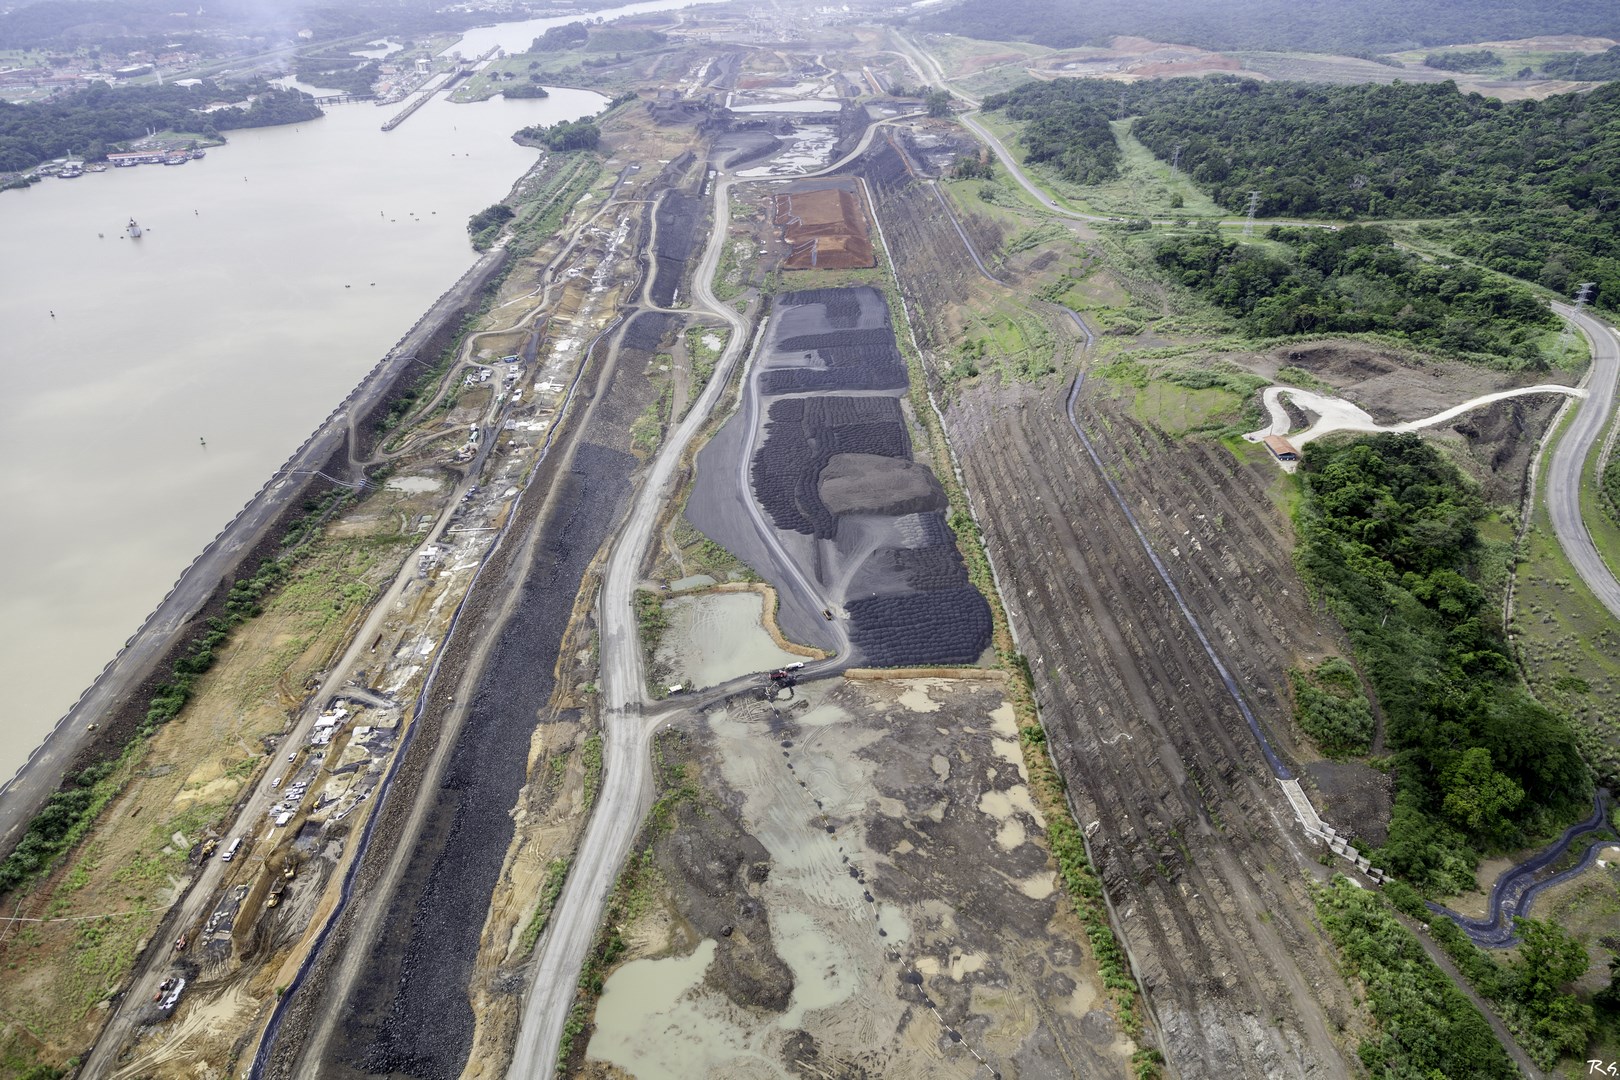 Panamá Canal works - aerial view